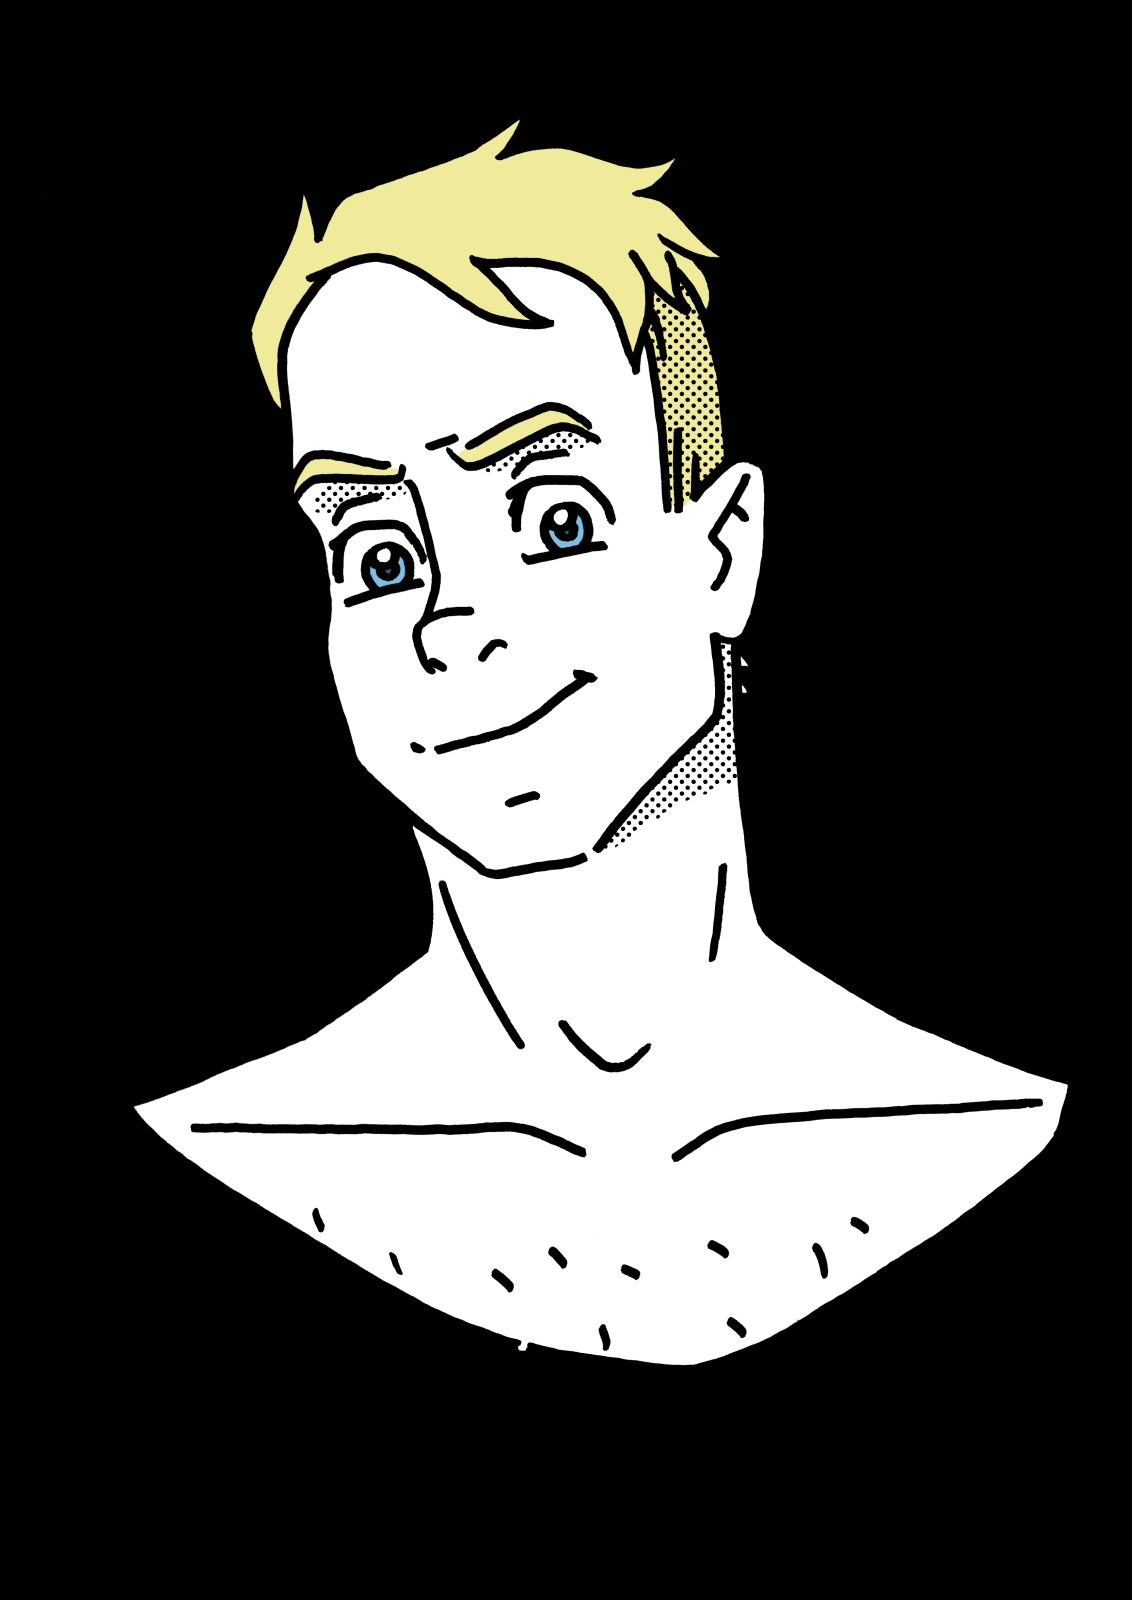 Guy, a guy (!) with blonde hair and a very wide necked T-shirt. He smiles in a good-natured way.